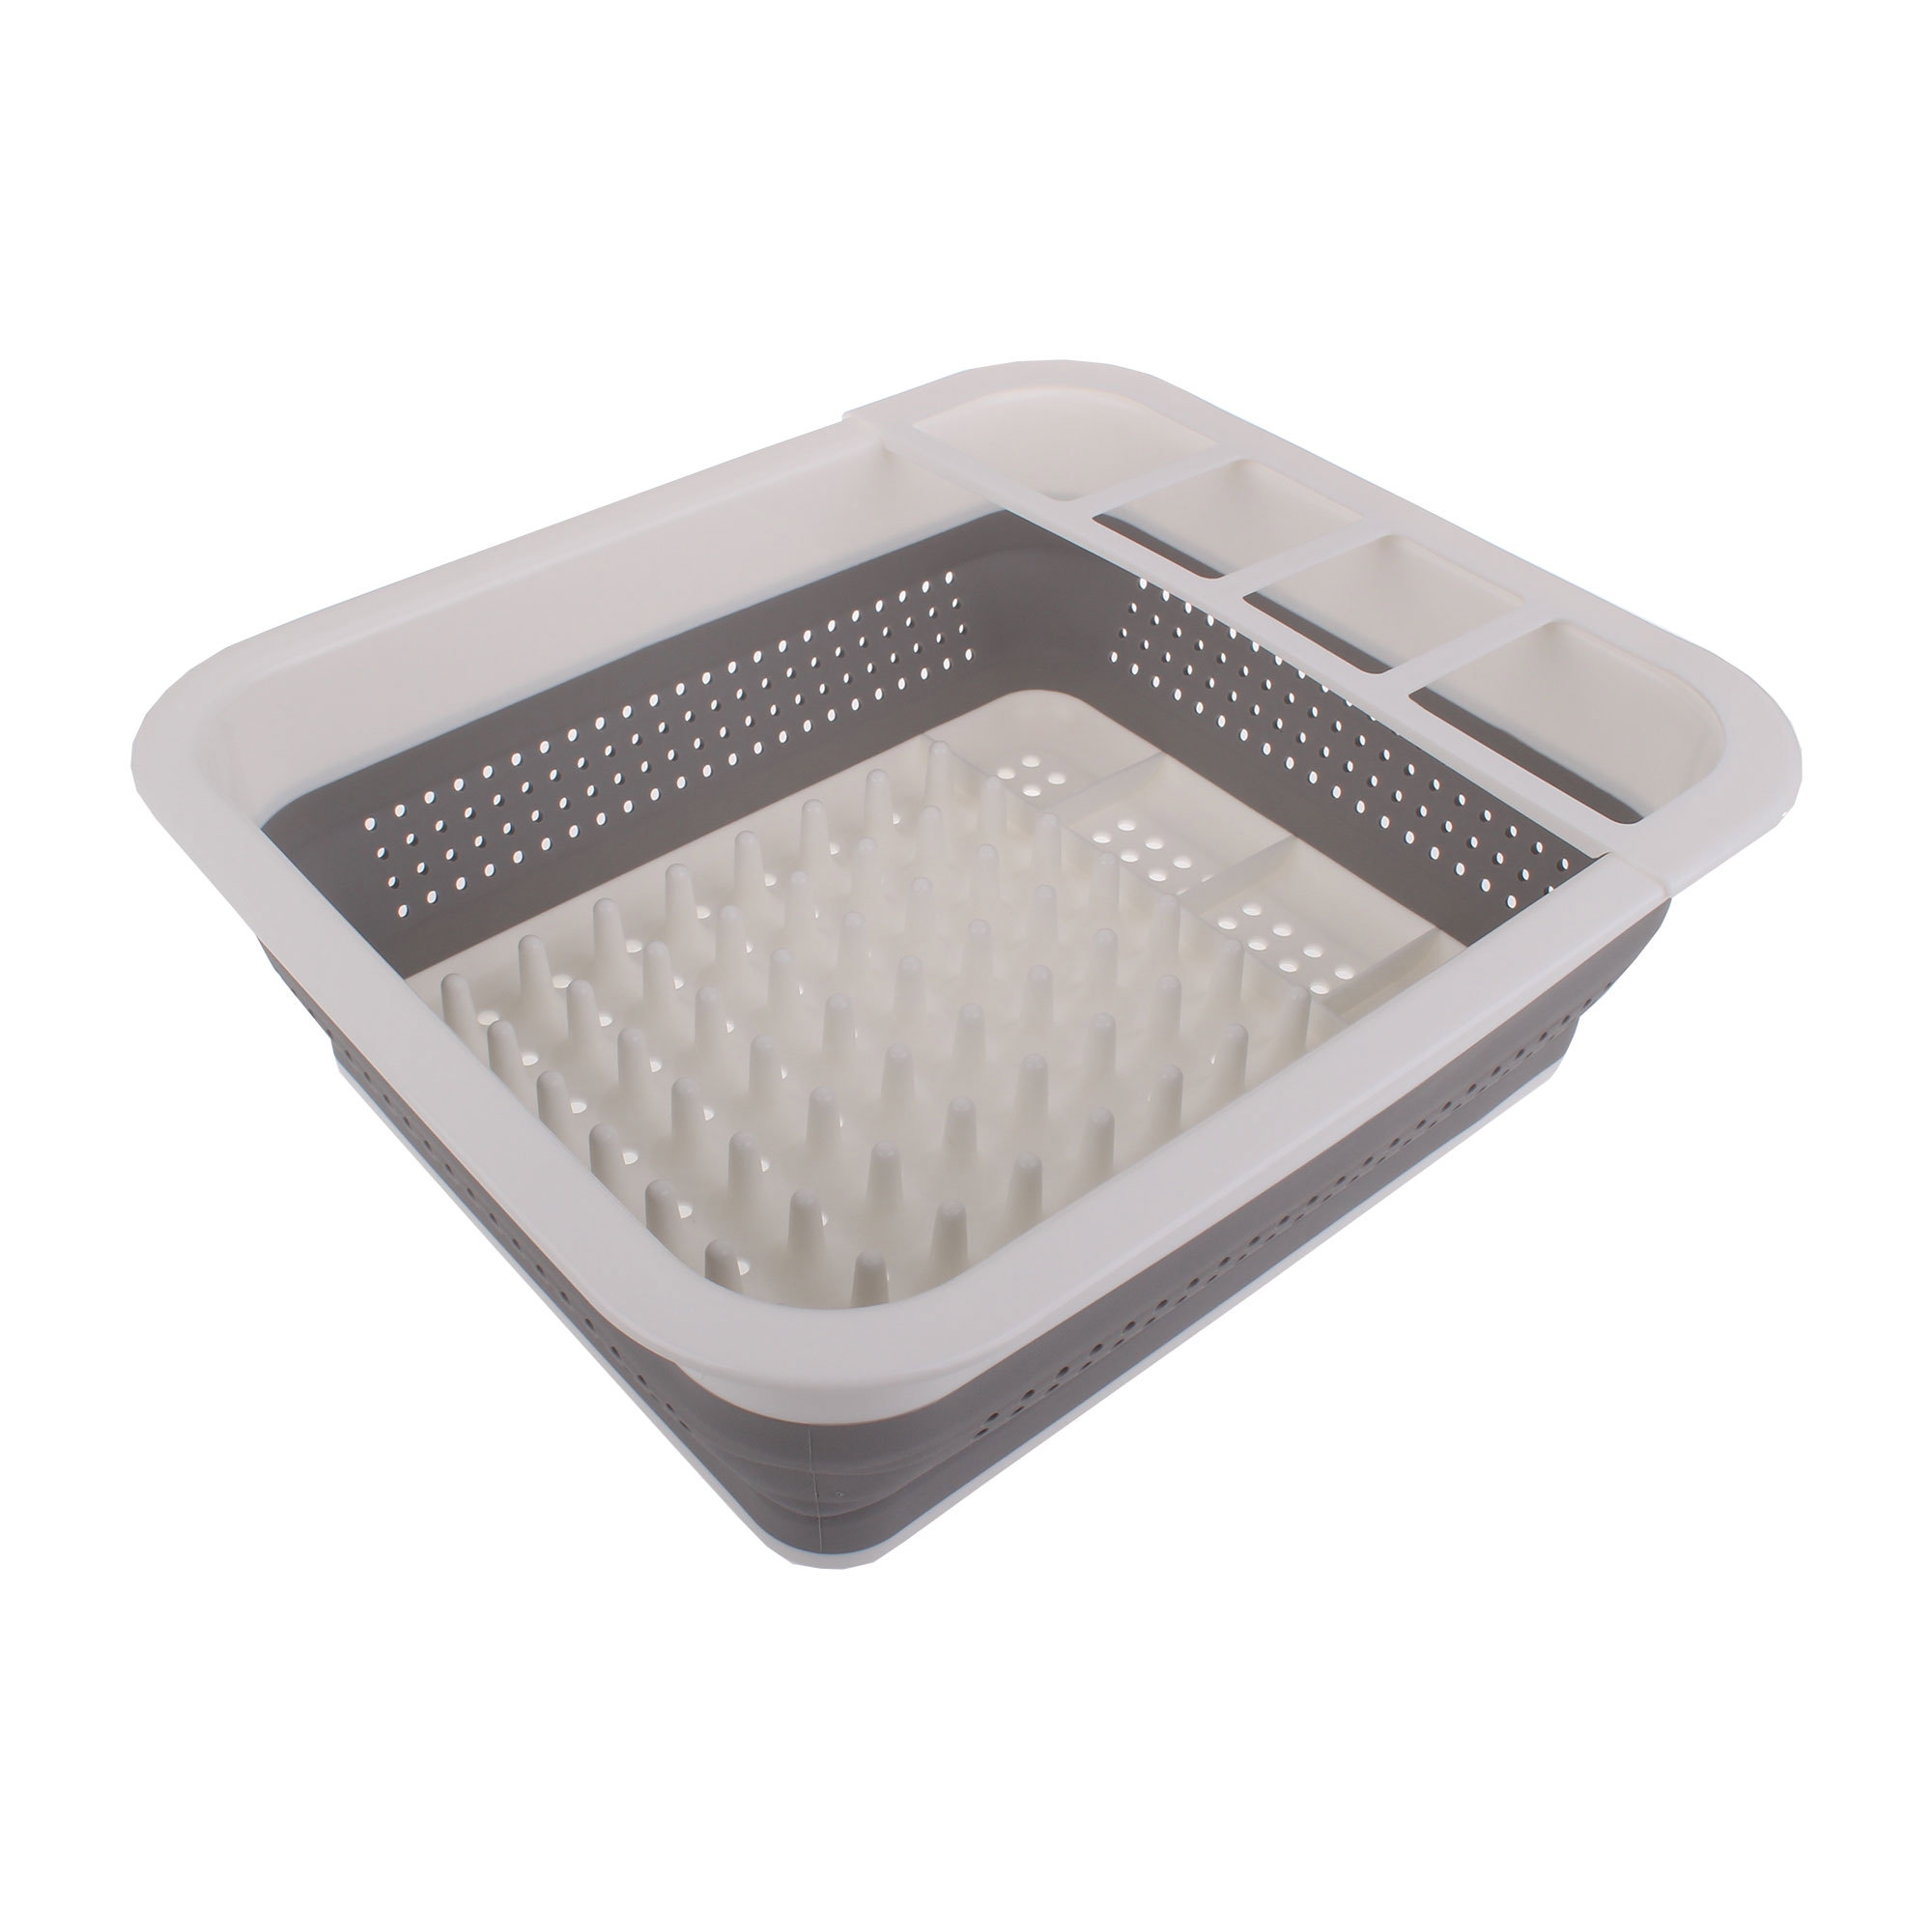 Madesmart Collapsible Dish Rack Small White Image 1